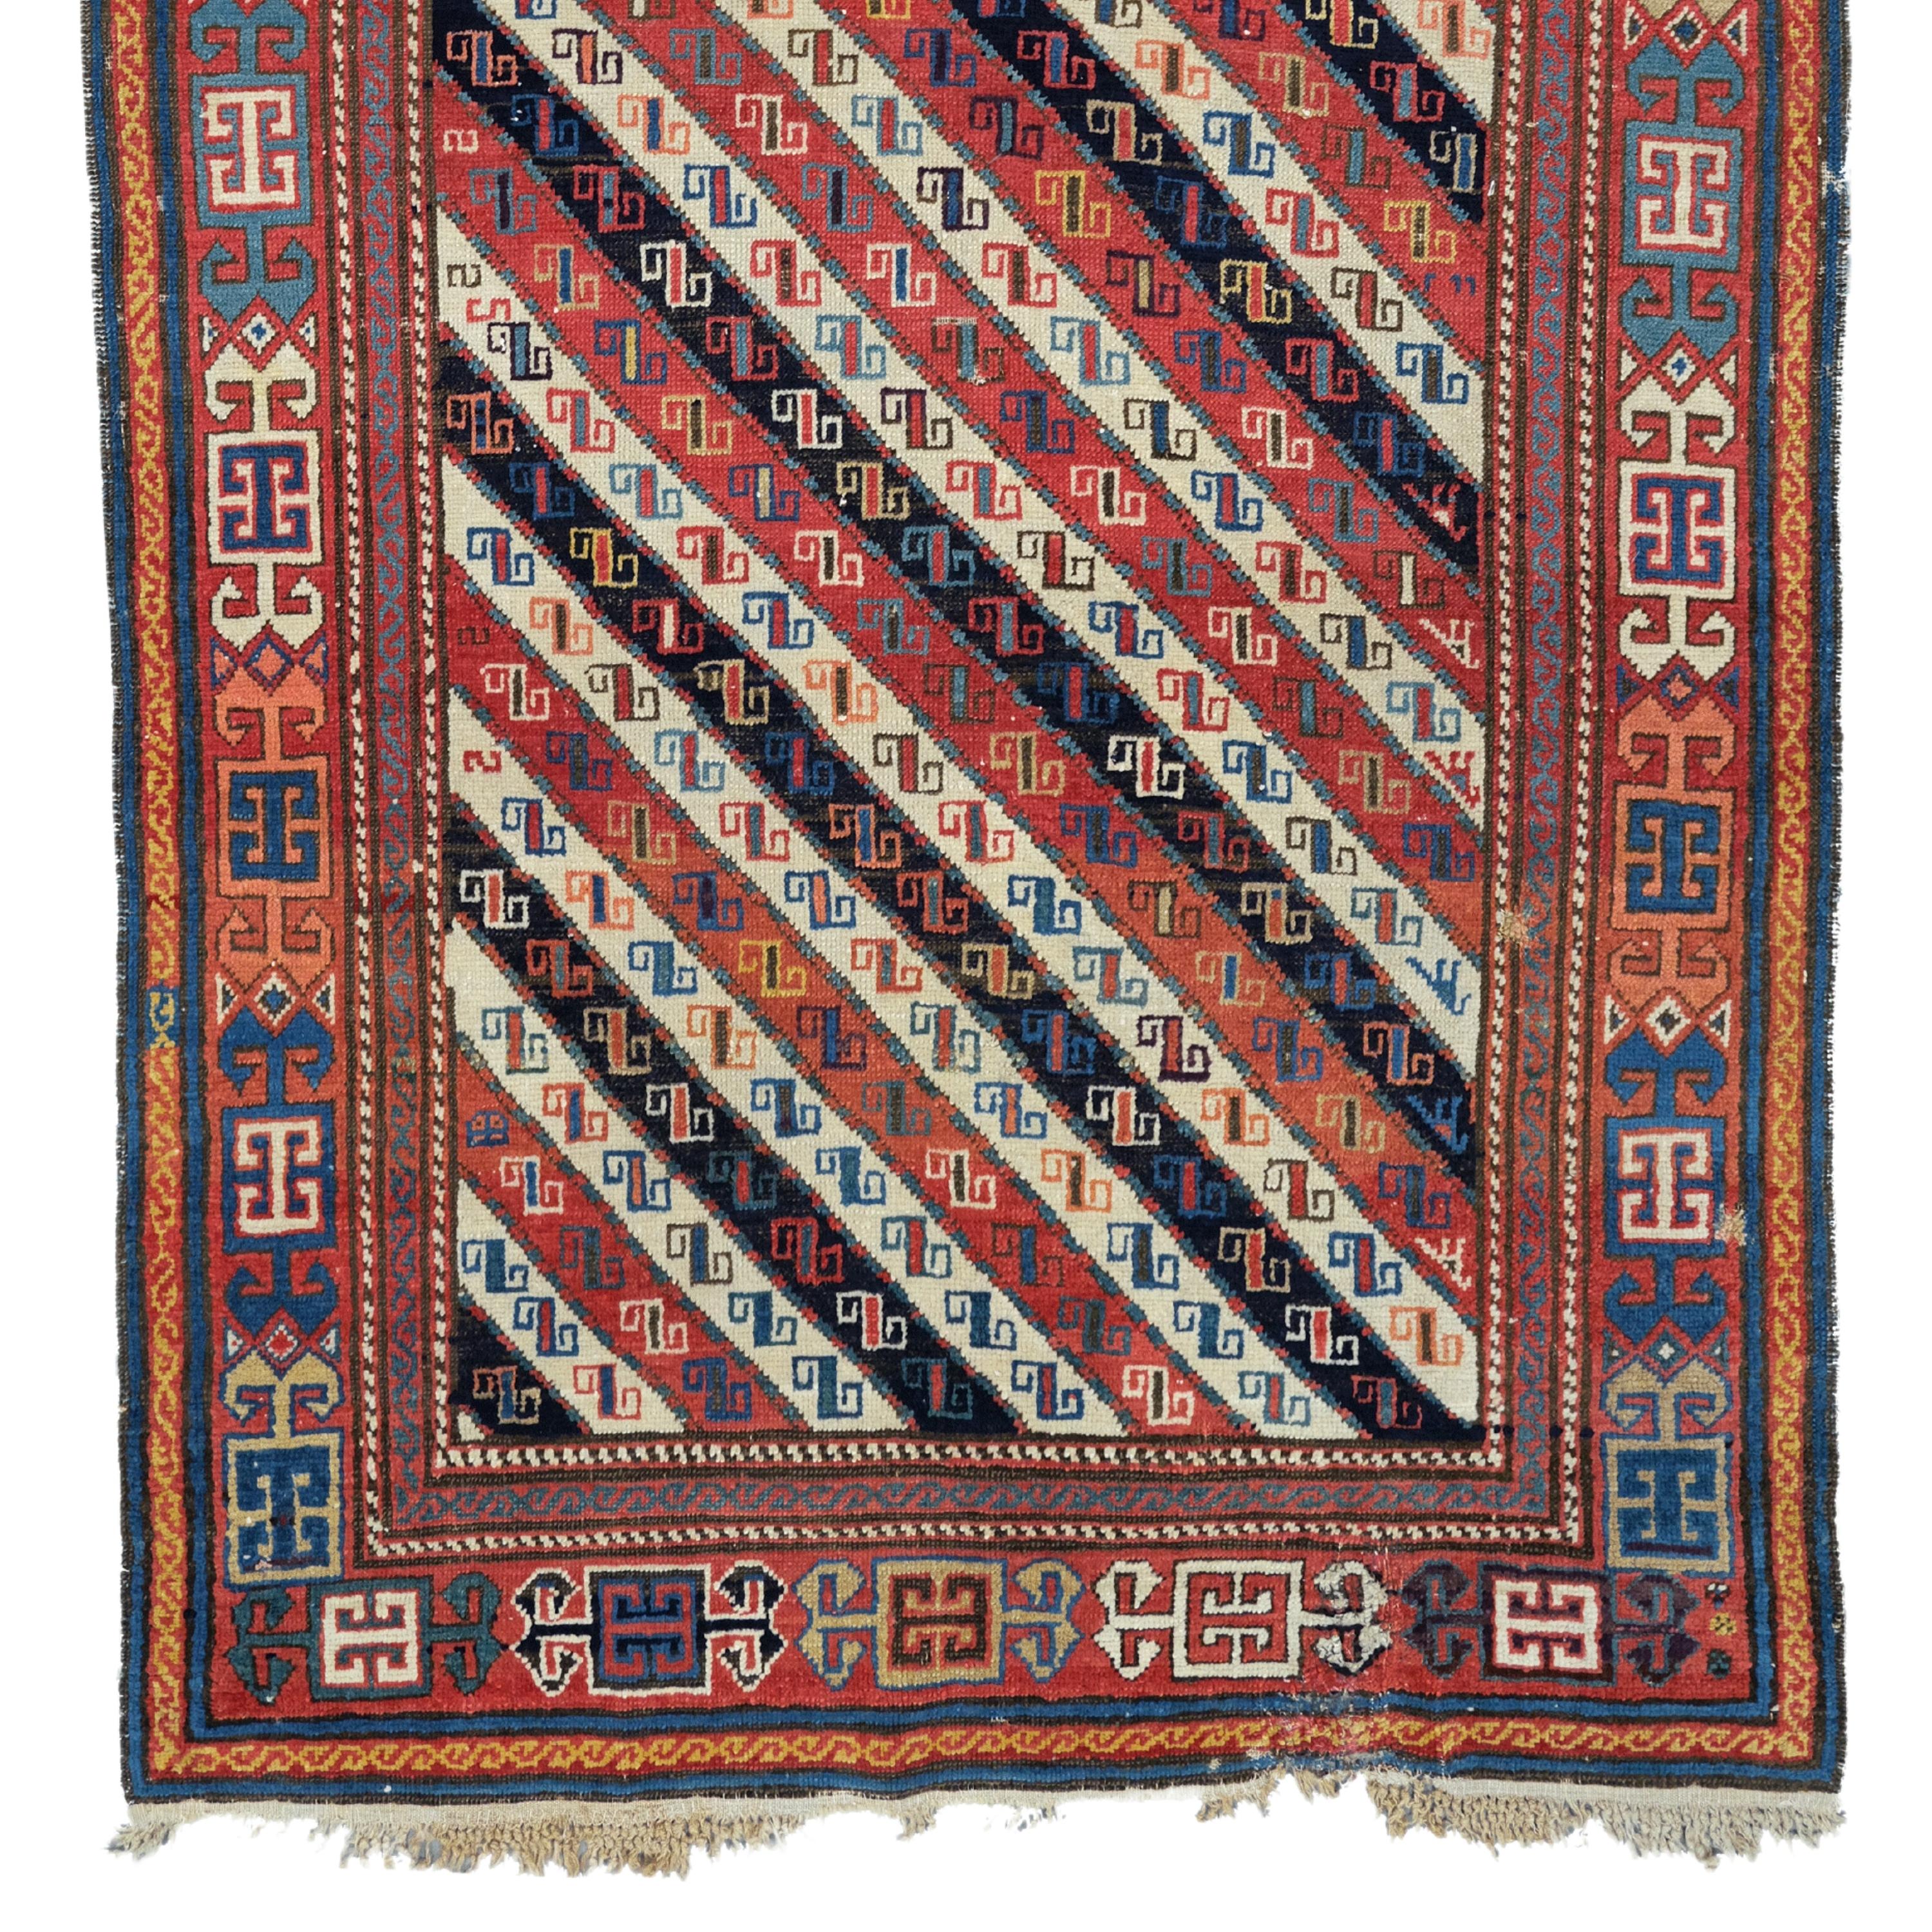 19th Century Caucasian Akstafa Rug

This extraordinary carpet will fascinate you with its intricate designs and vibrant colors that reflect the rich history and craftsmanship of the period. Each stitch tells the story of skilled craftsmen who